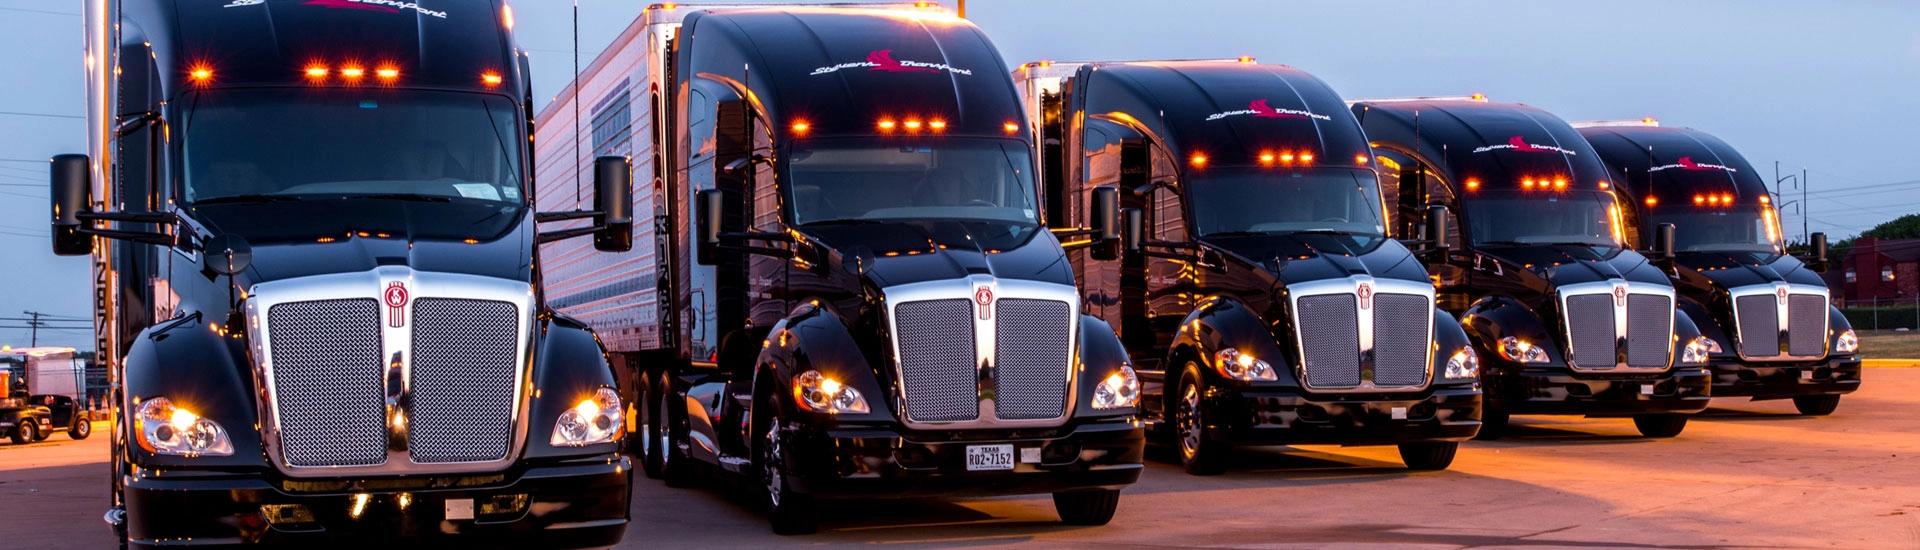 rows of black trucks monitored by fleet management software